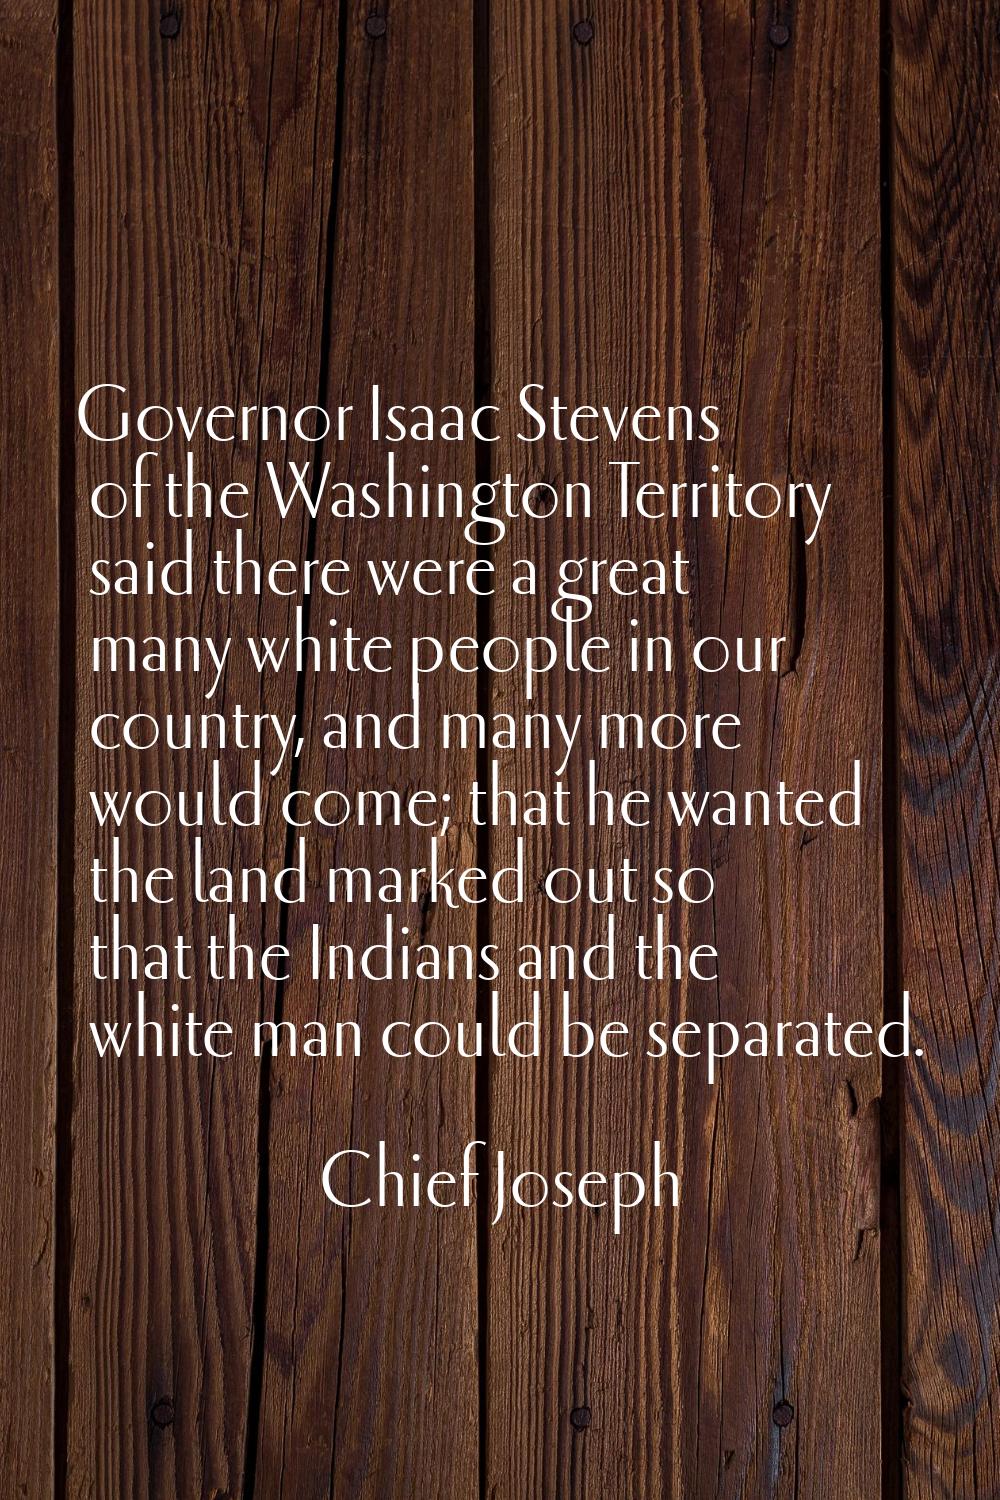 Governor Isaac Stevens of the Washington Territory said there were a great many white people in our